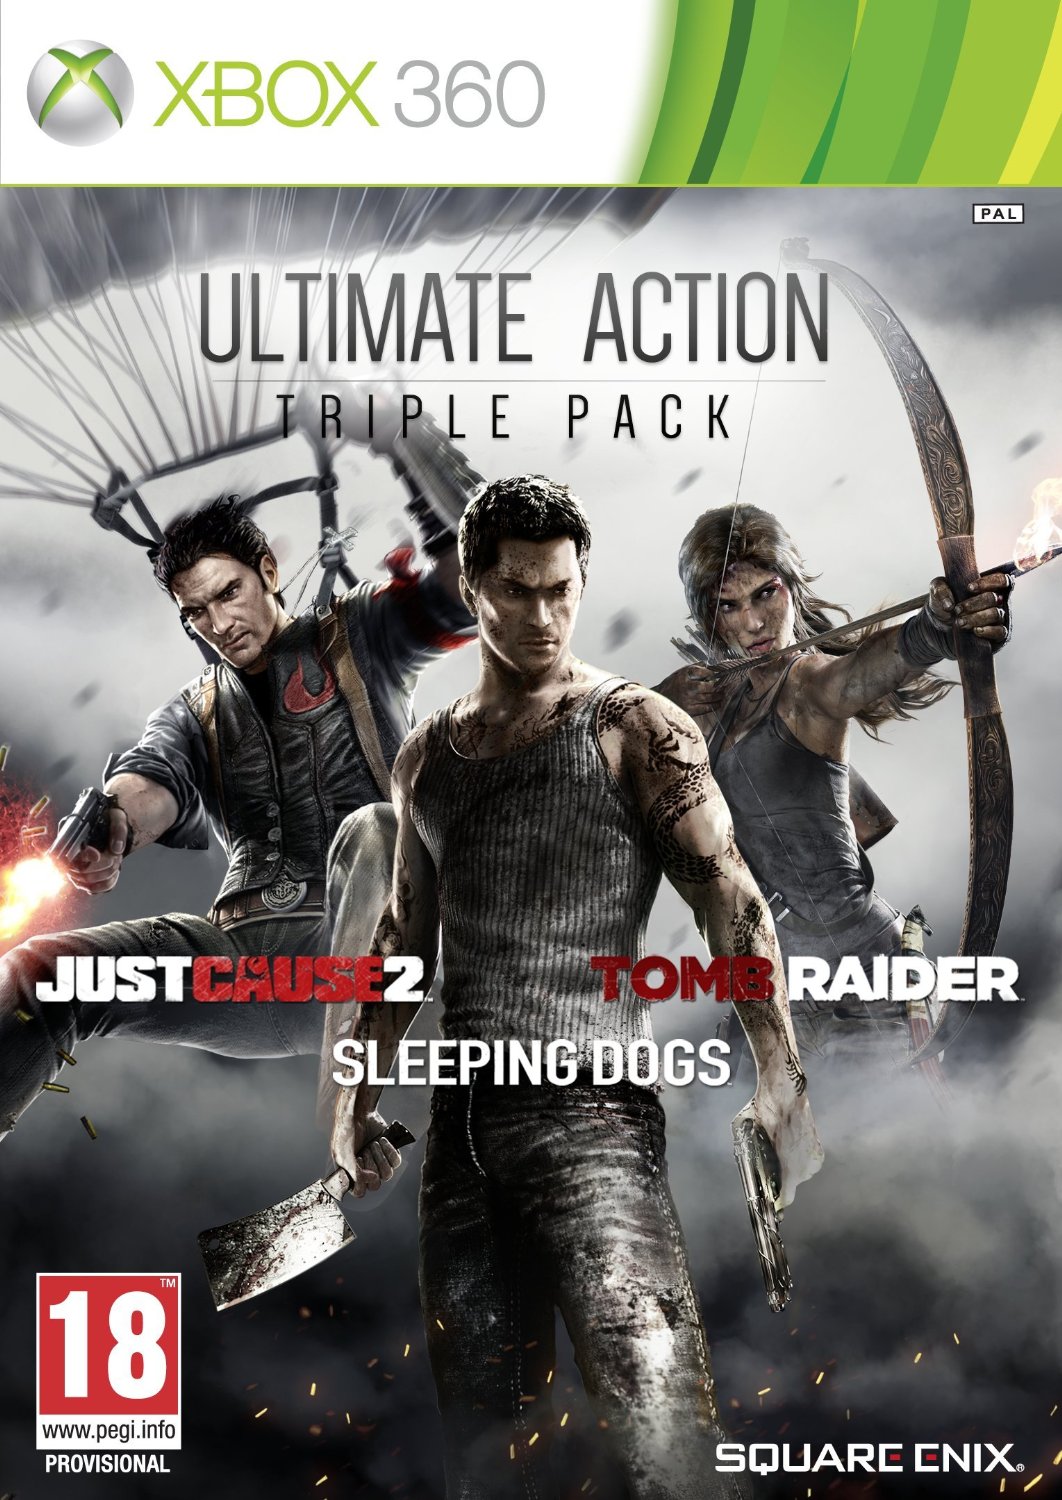 Ultimate Action Triple Pack for XBOX360 to rent